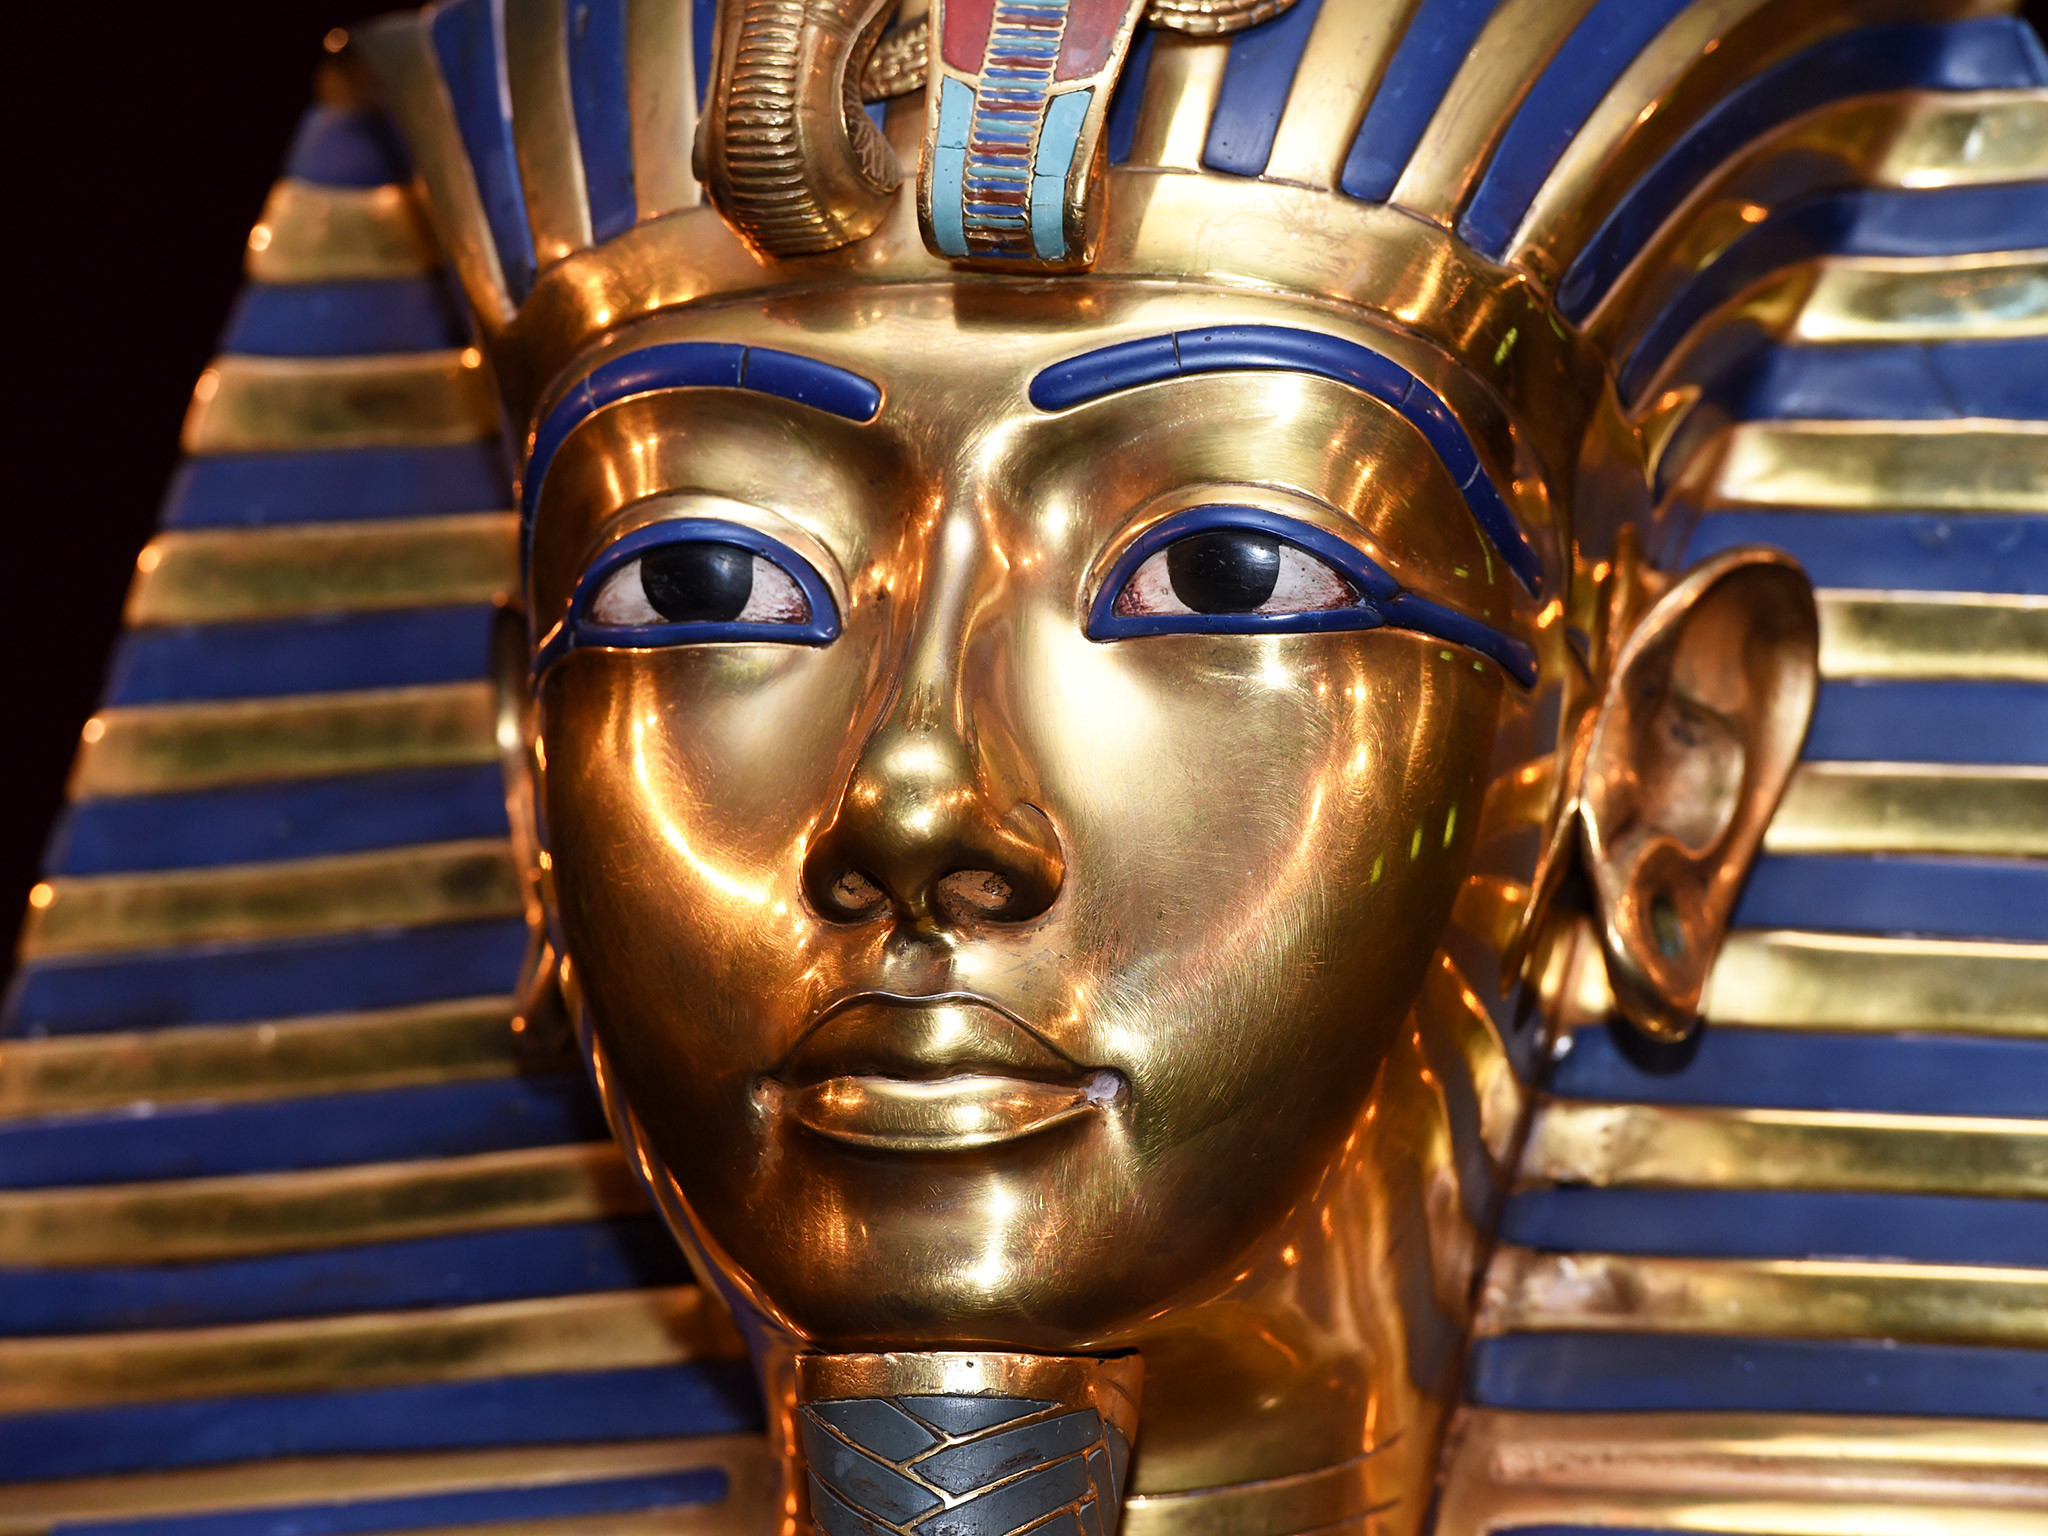 2048x1536 The real King Tut revealed: Tutankhamun was many things, but handsome he  was not | The Independent